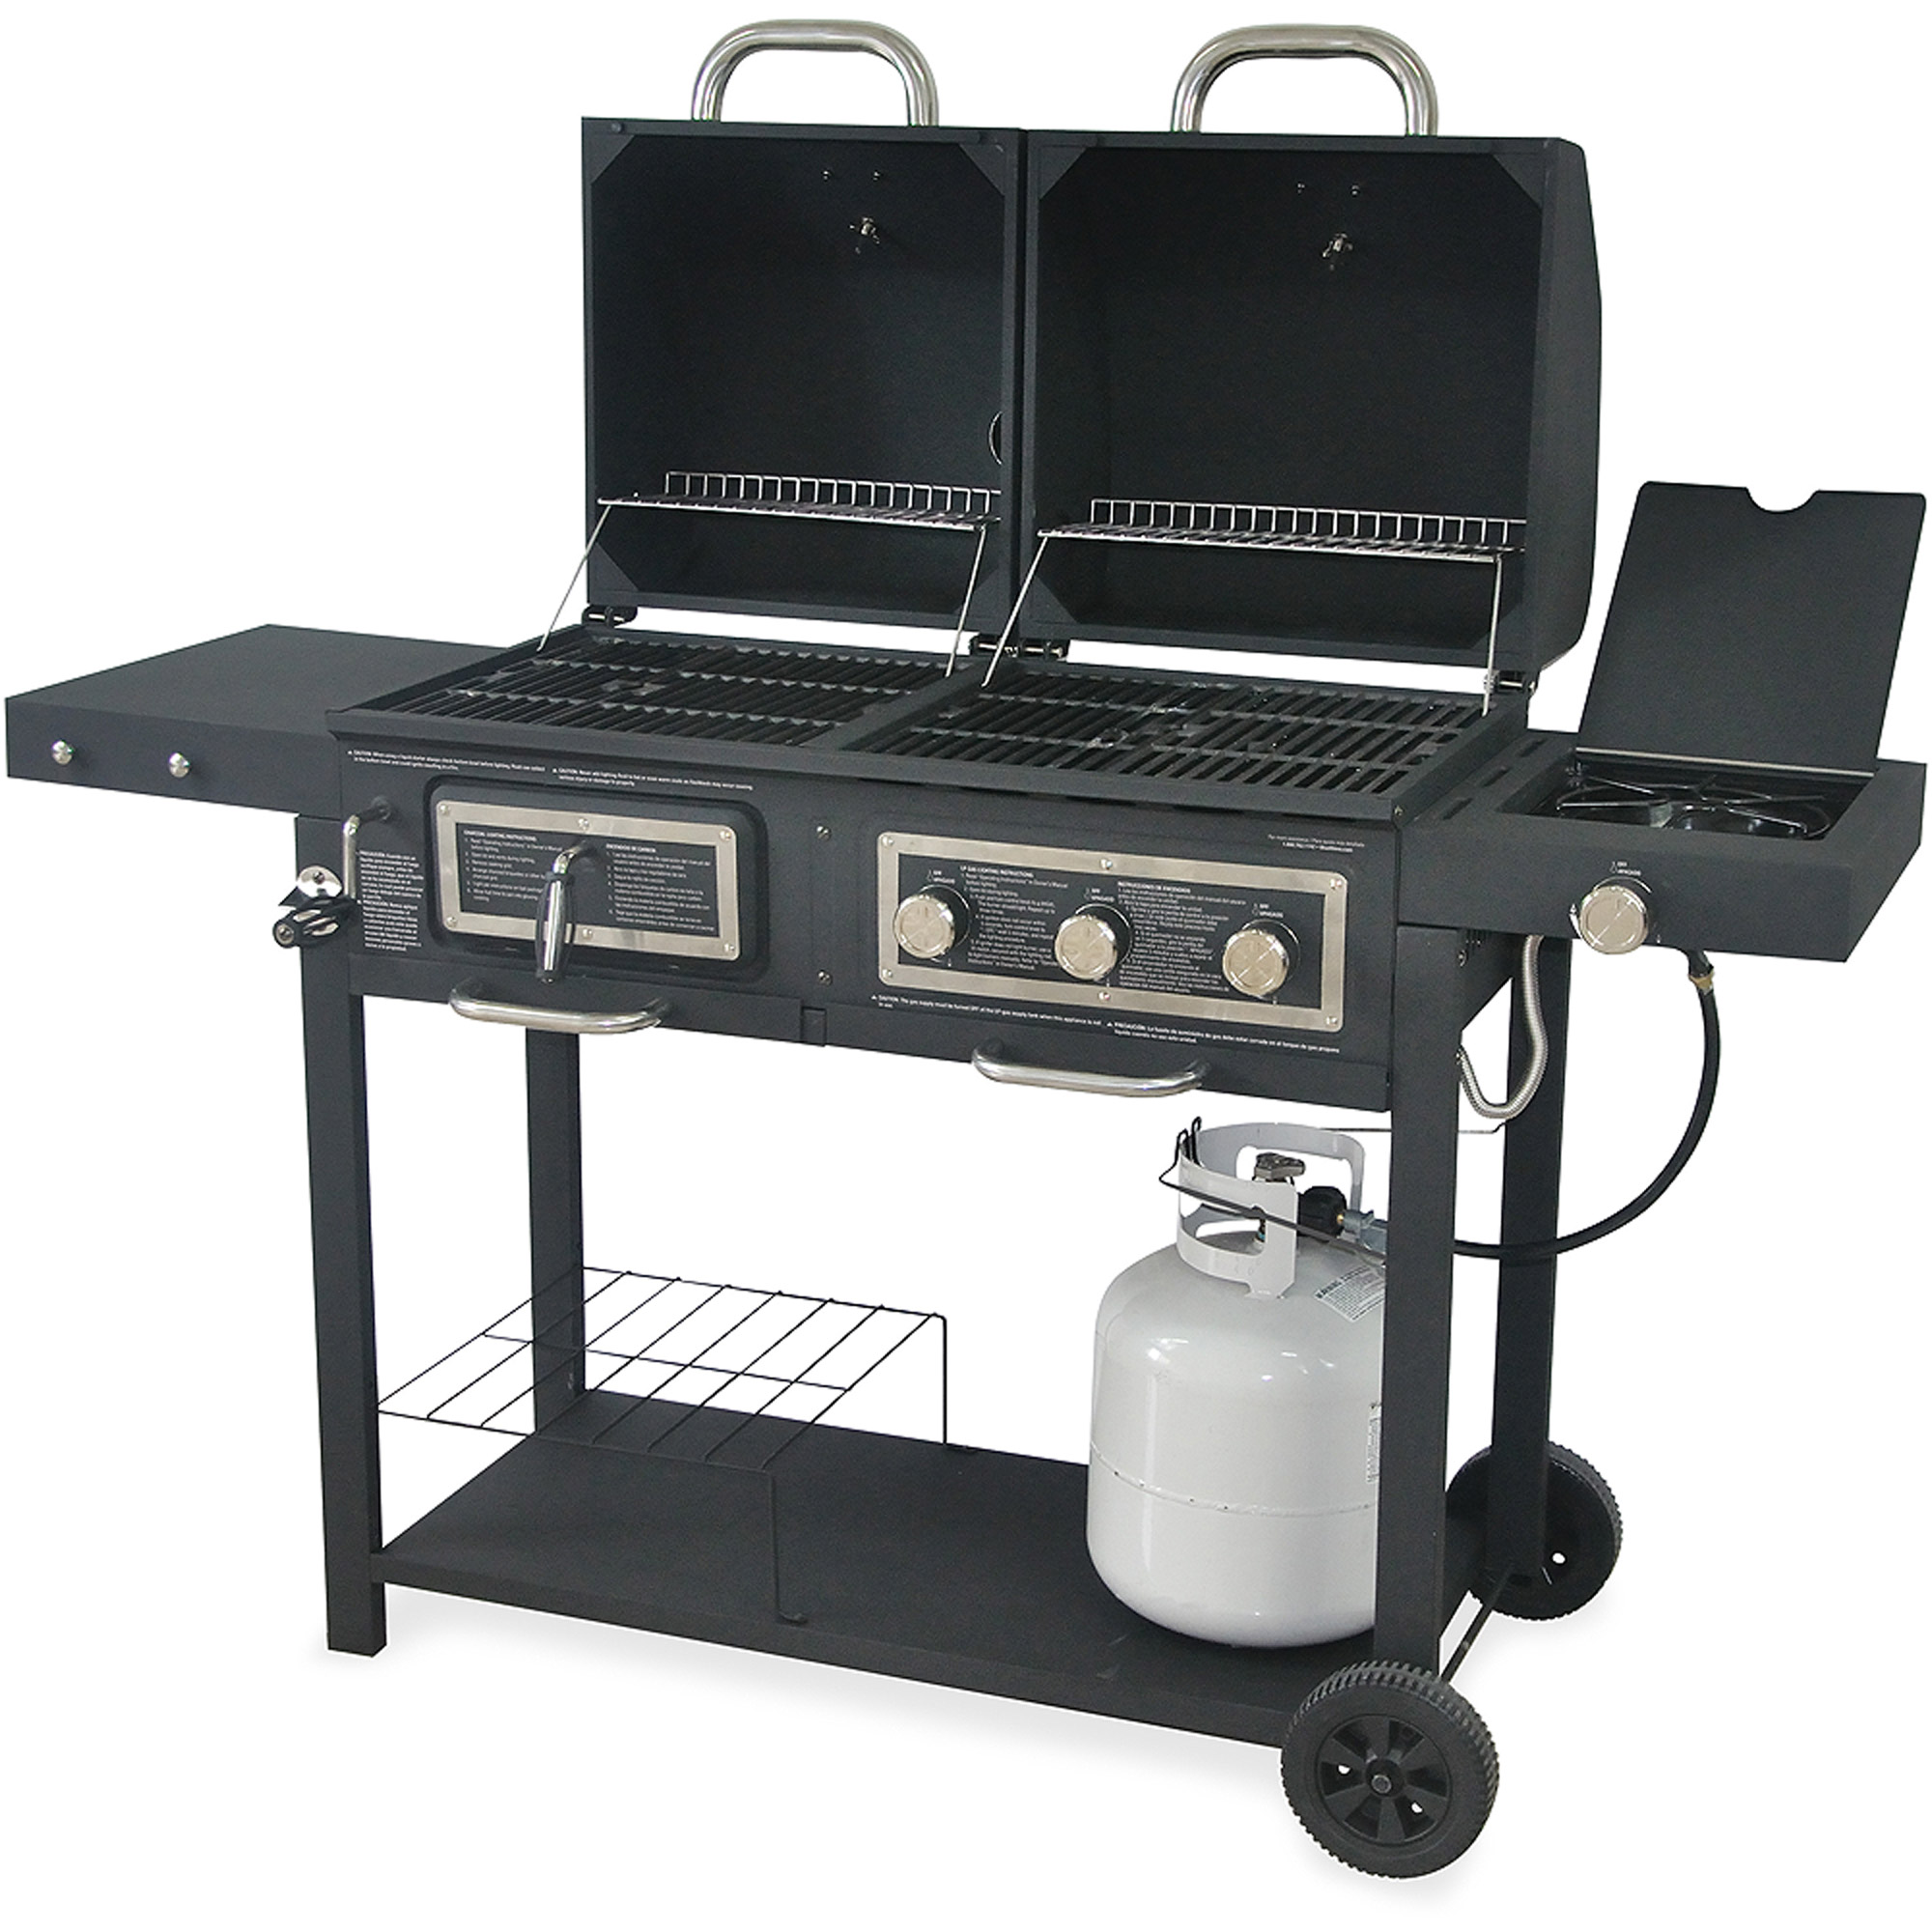 667-sq in Gas/Charcoal Grill - image 4 of 4